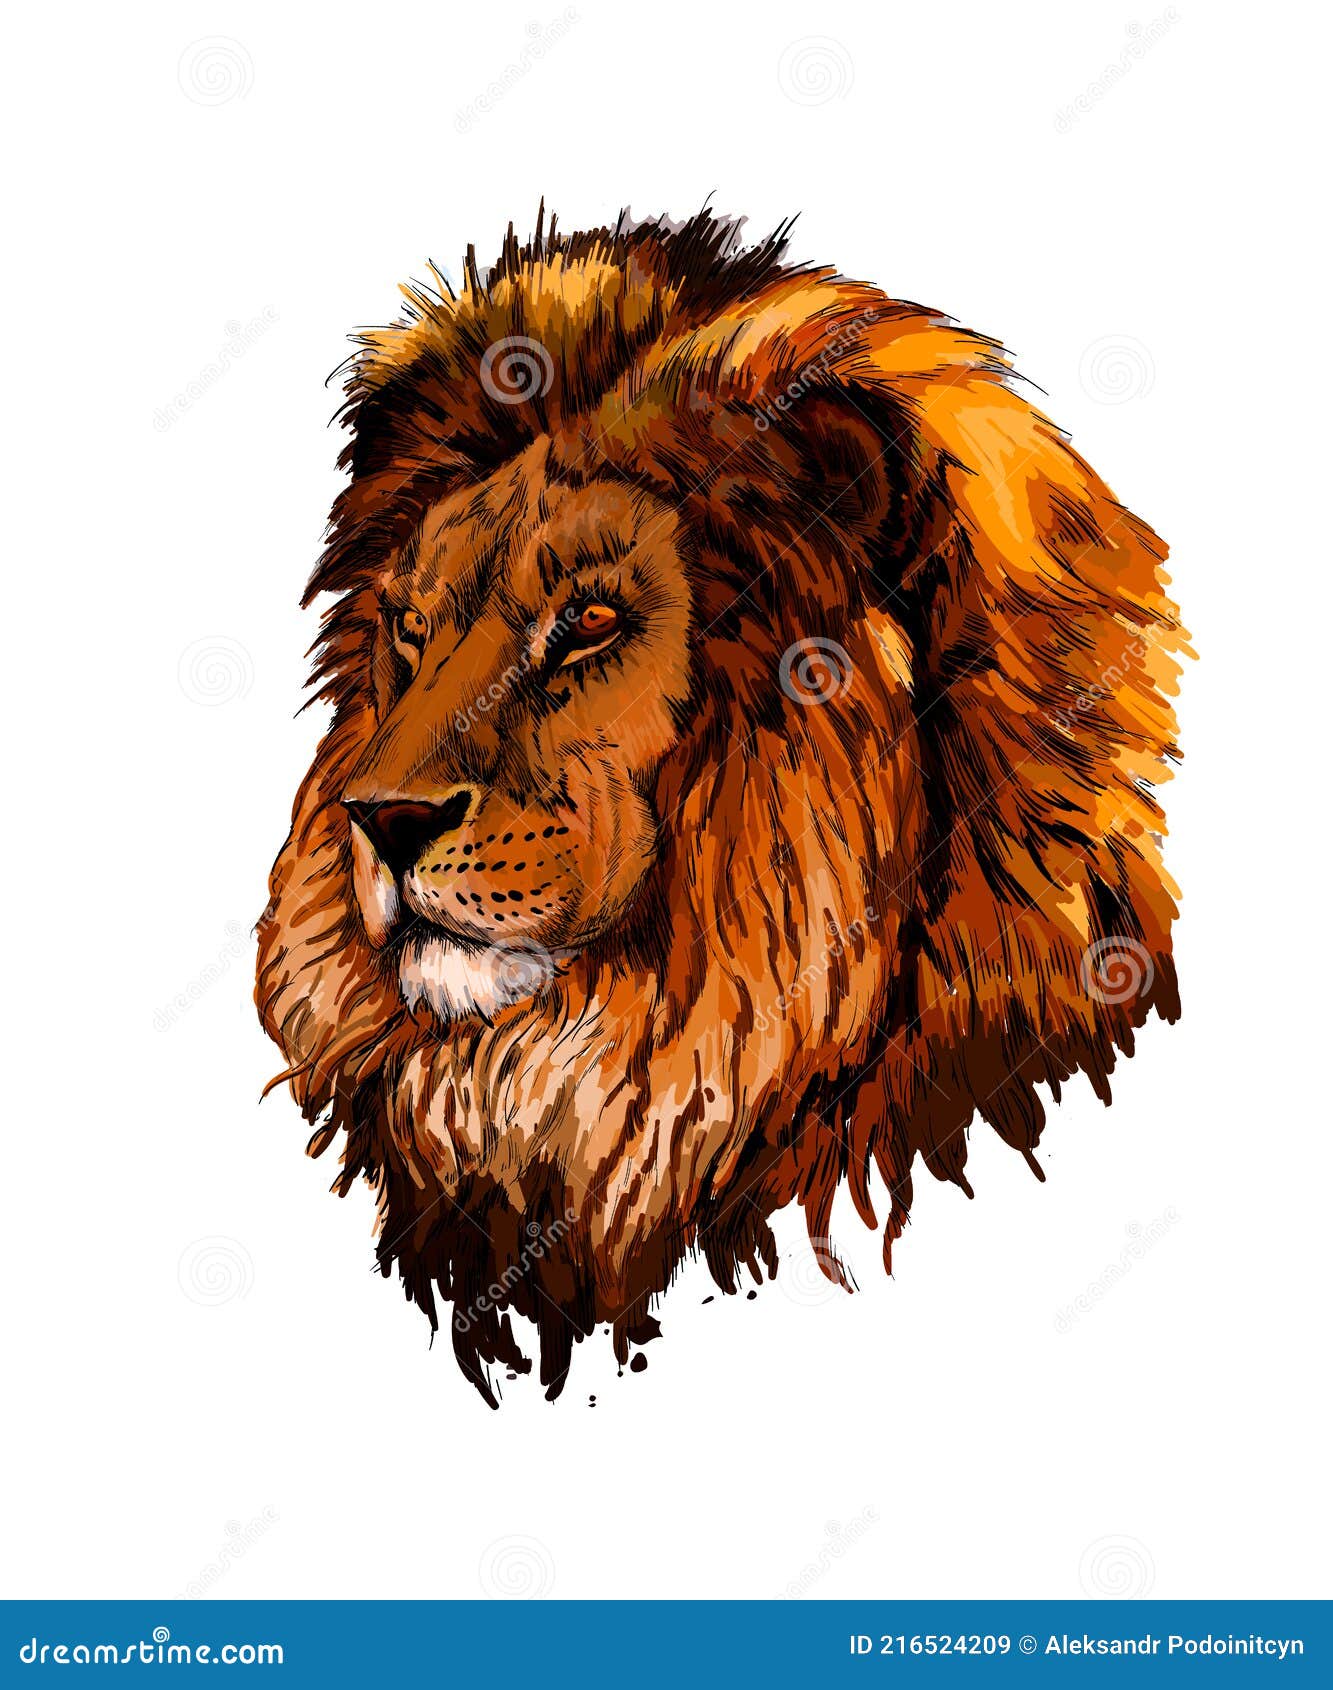 Lion Drawing with Flowers Tattoo Design Gift' Sticker | Spreadshirt